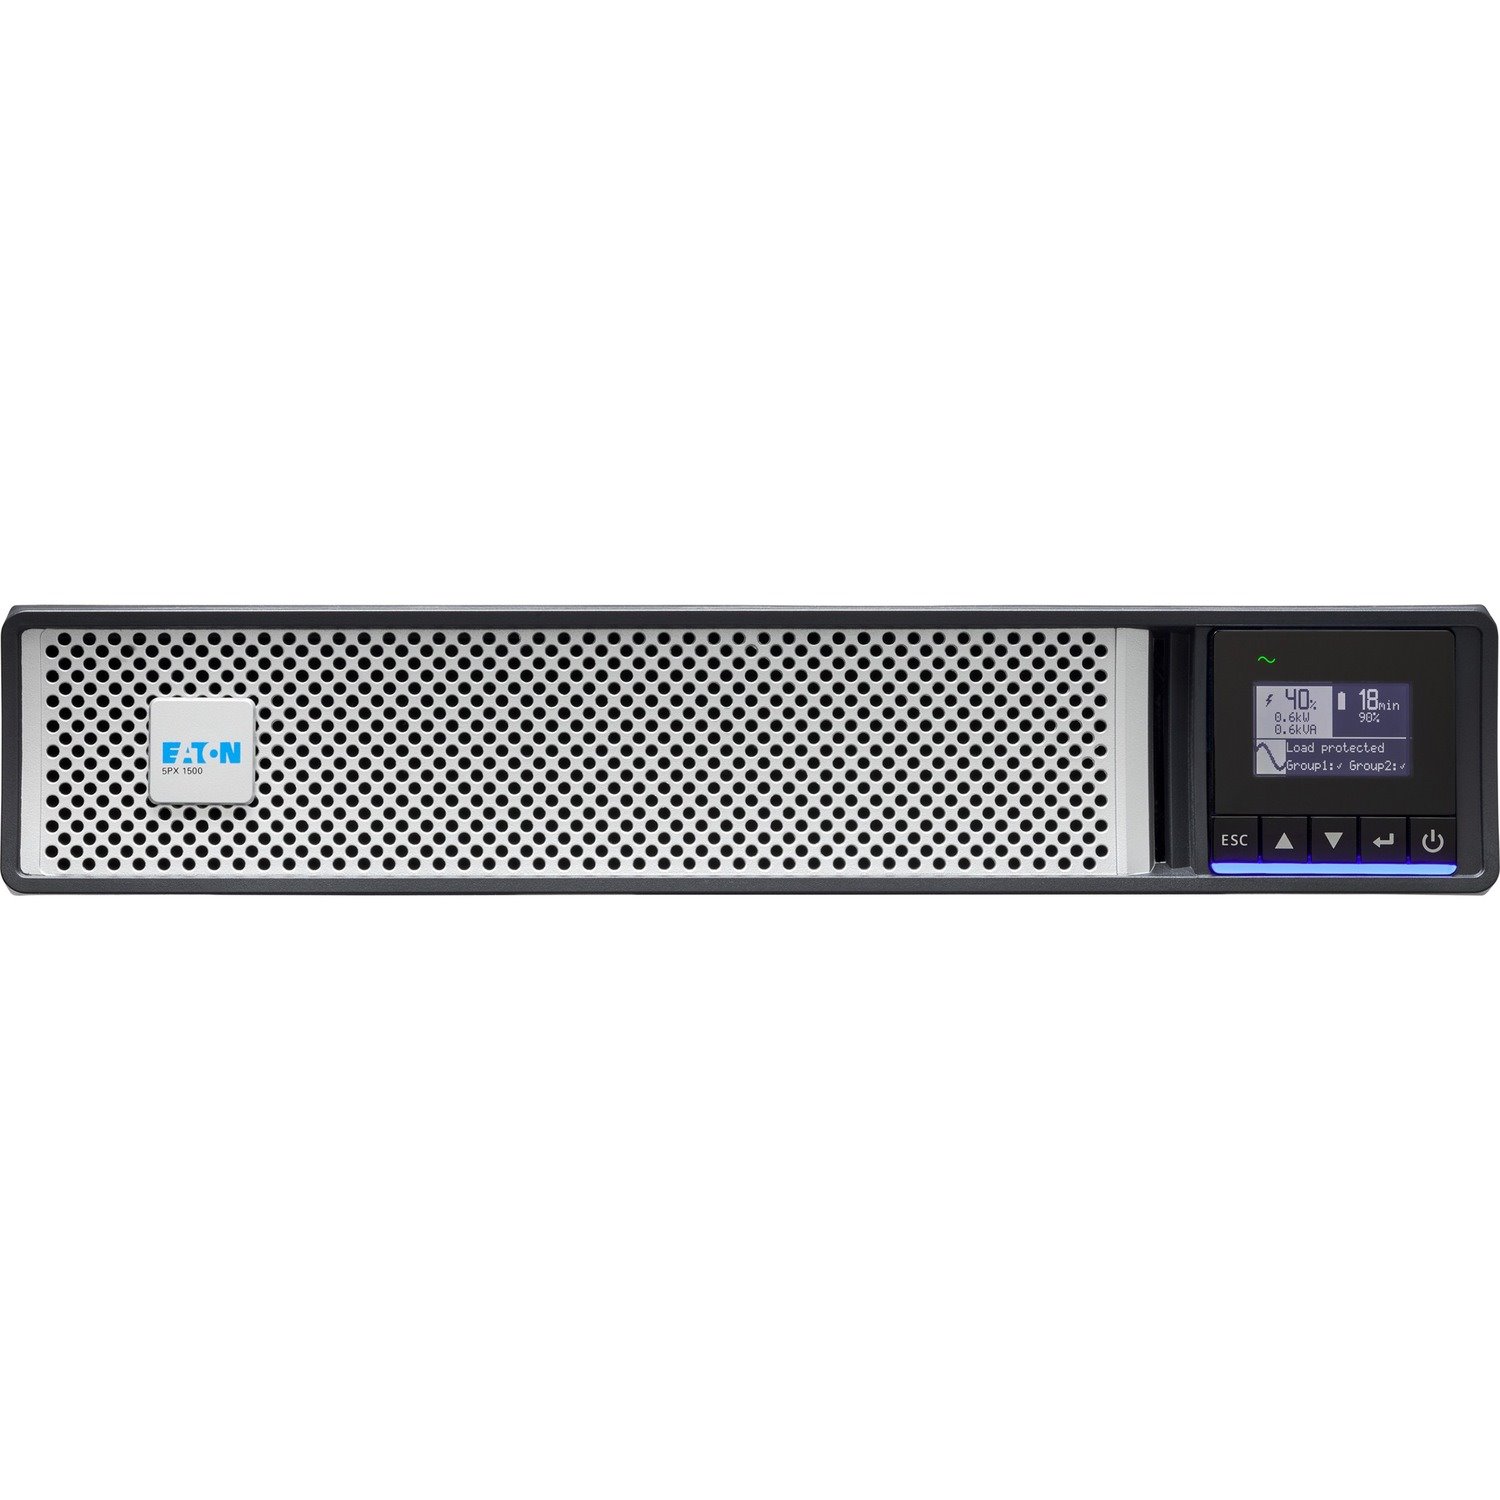 Eaton 5PX G2 1500VA 1500W 208V Line-Interactive UPS - 8 C13 Outlets, Cybersecure Network Card Option, Extended Run, 2U Rack/Tower - Battery Backup